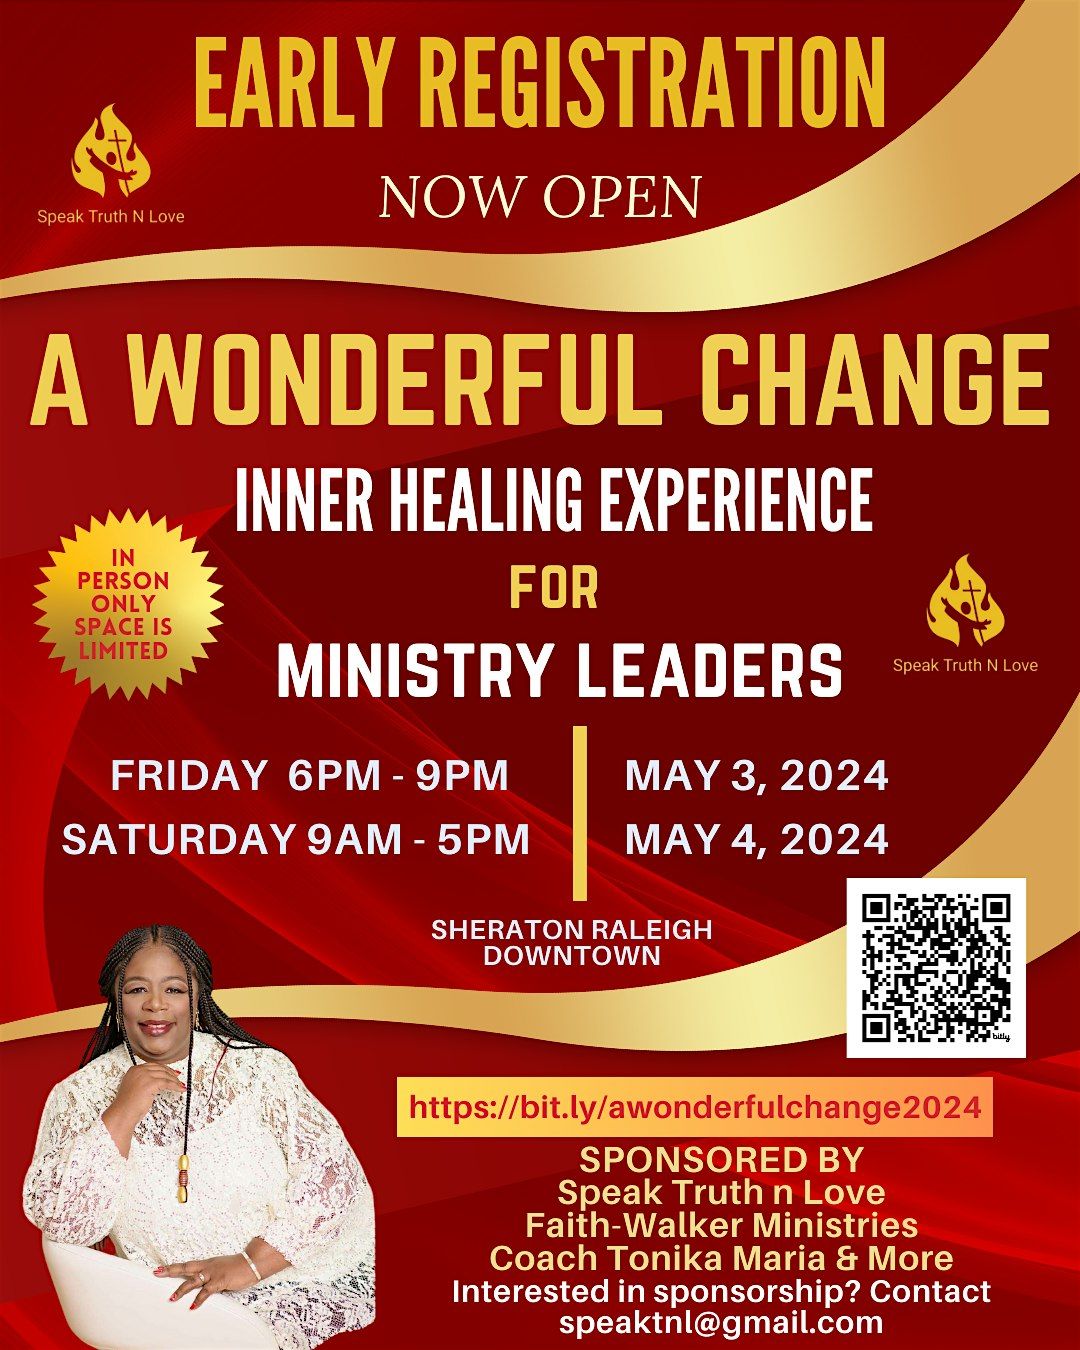 A Wonderful Change Inner Healing Experience (Friday 6-9pm - Saturday 9-5pm)